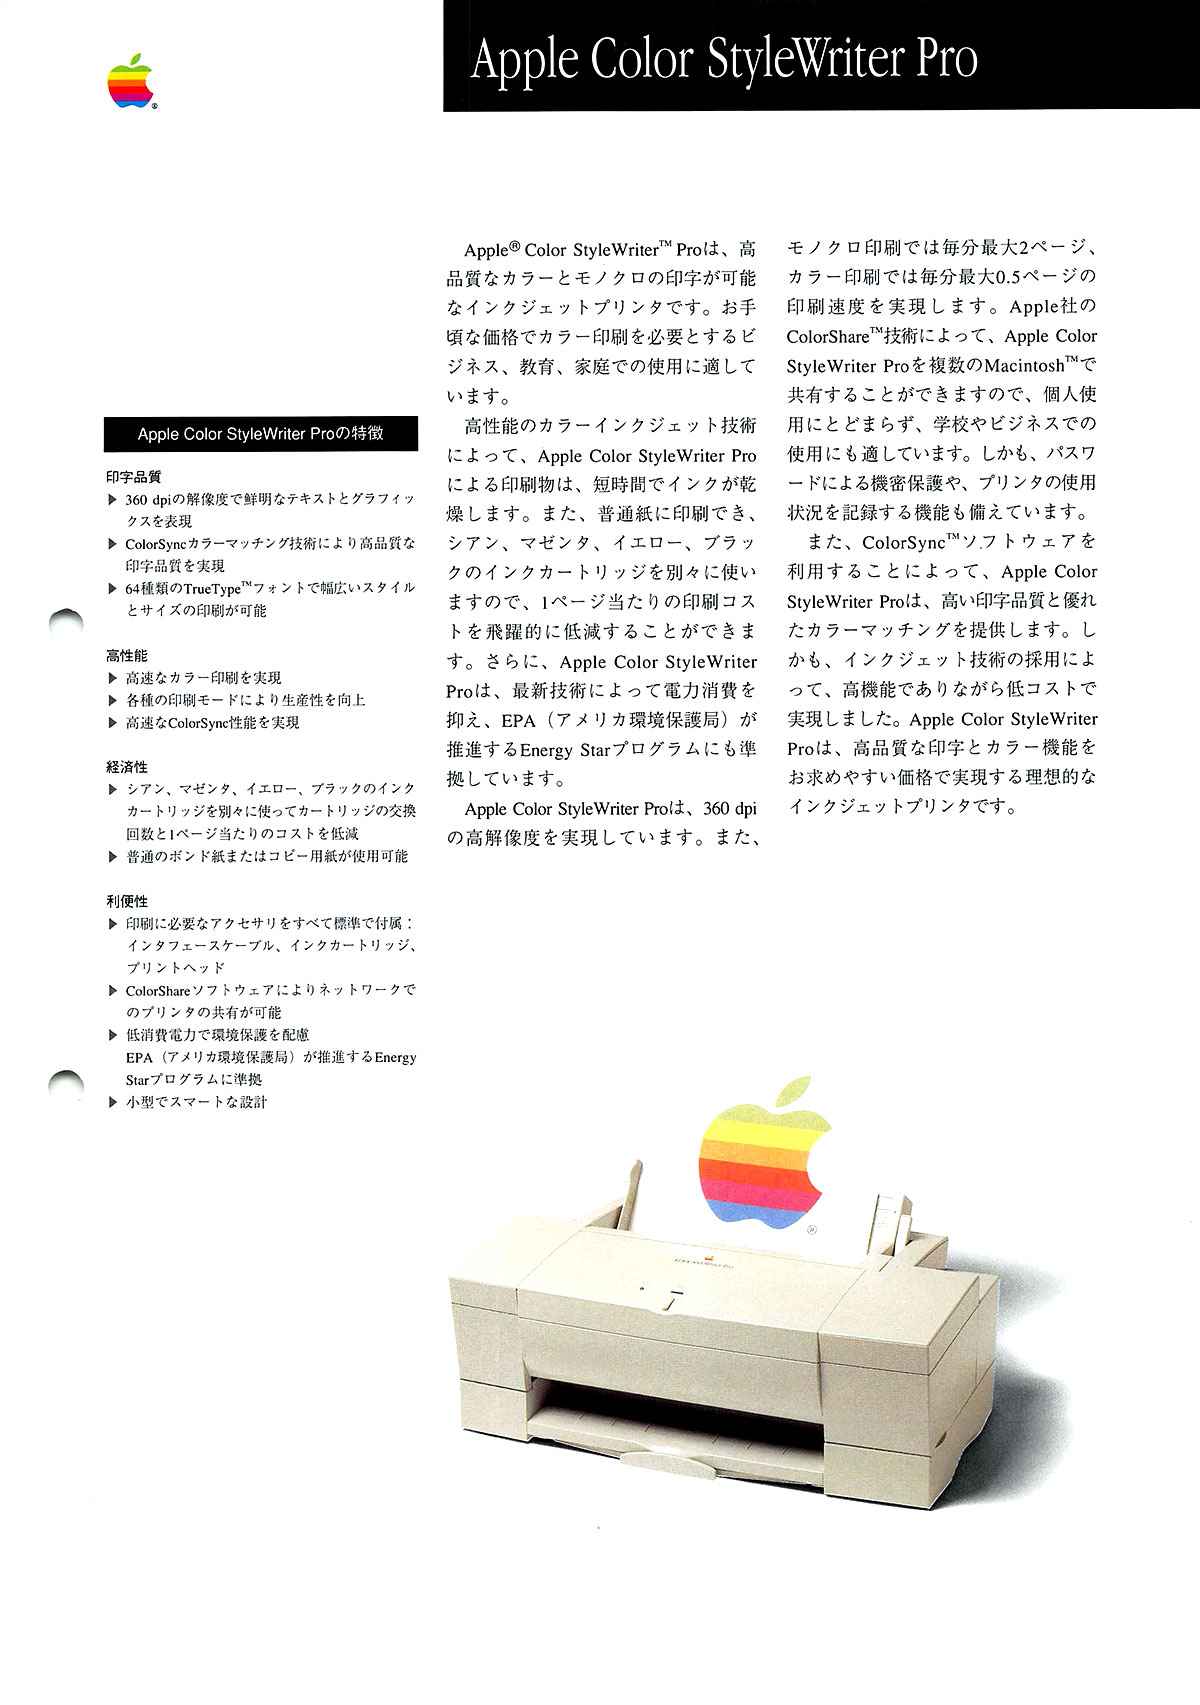 Apple Color StyleWriter Pro